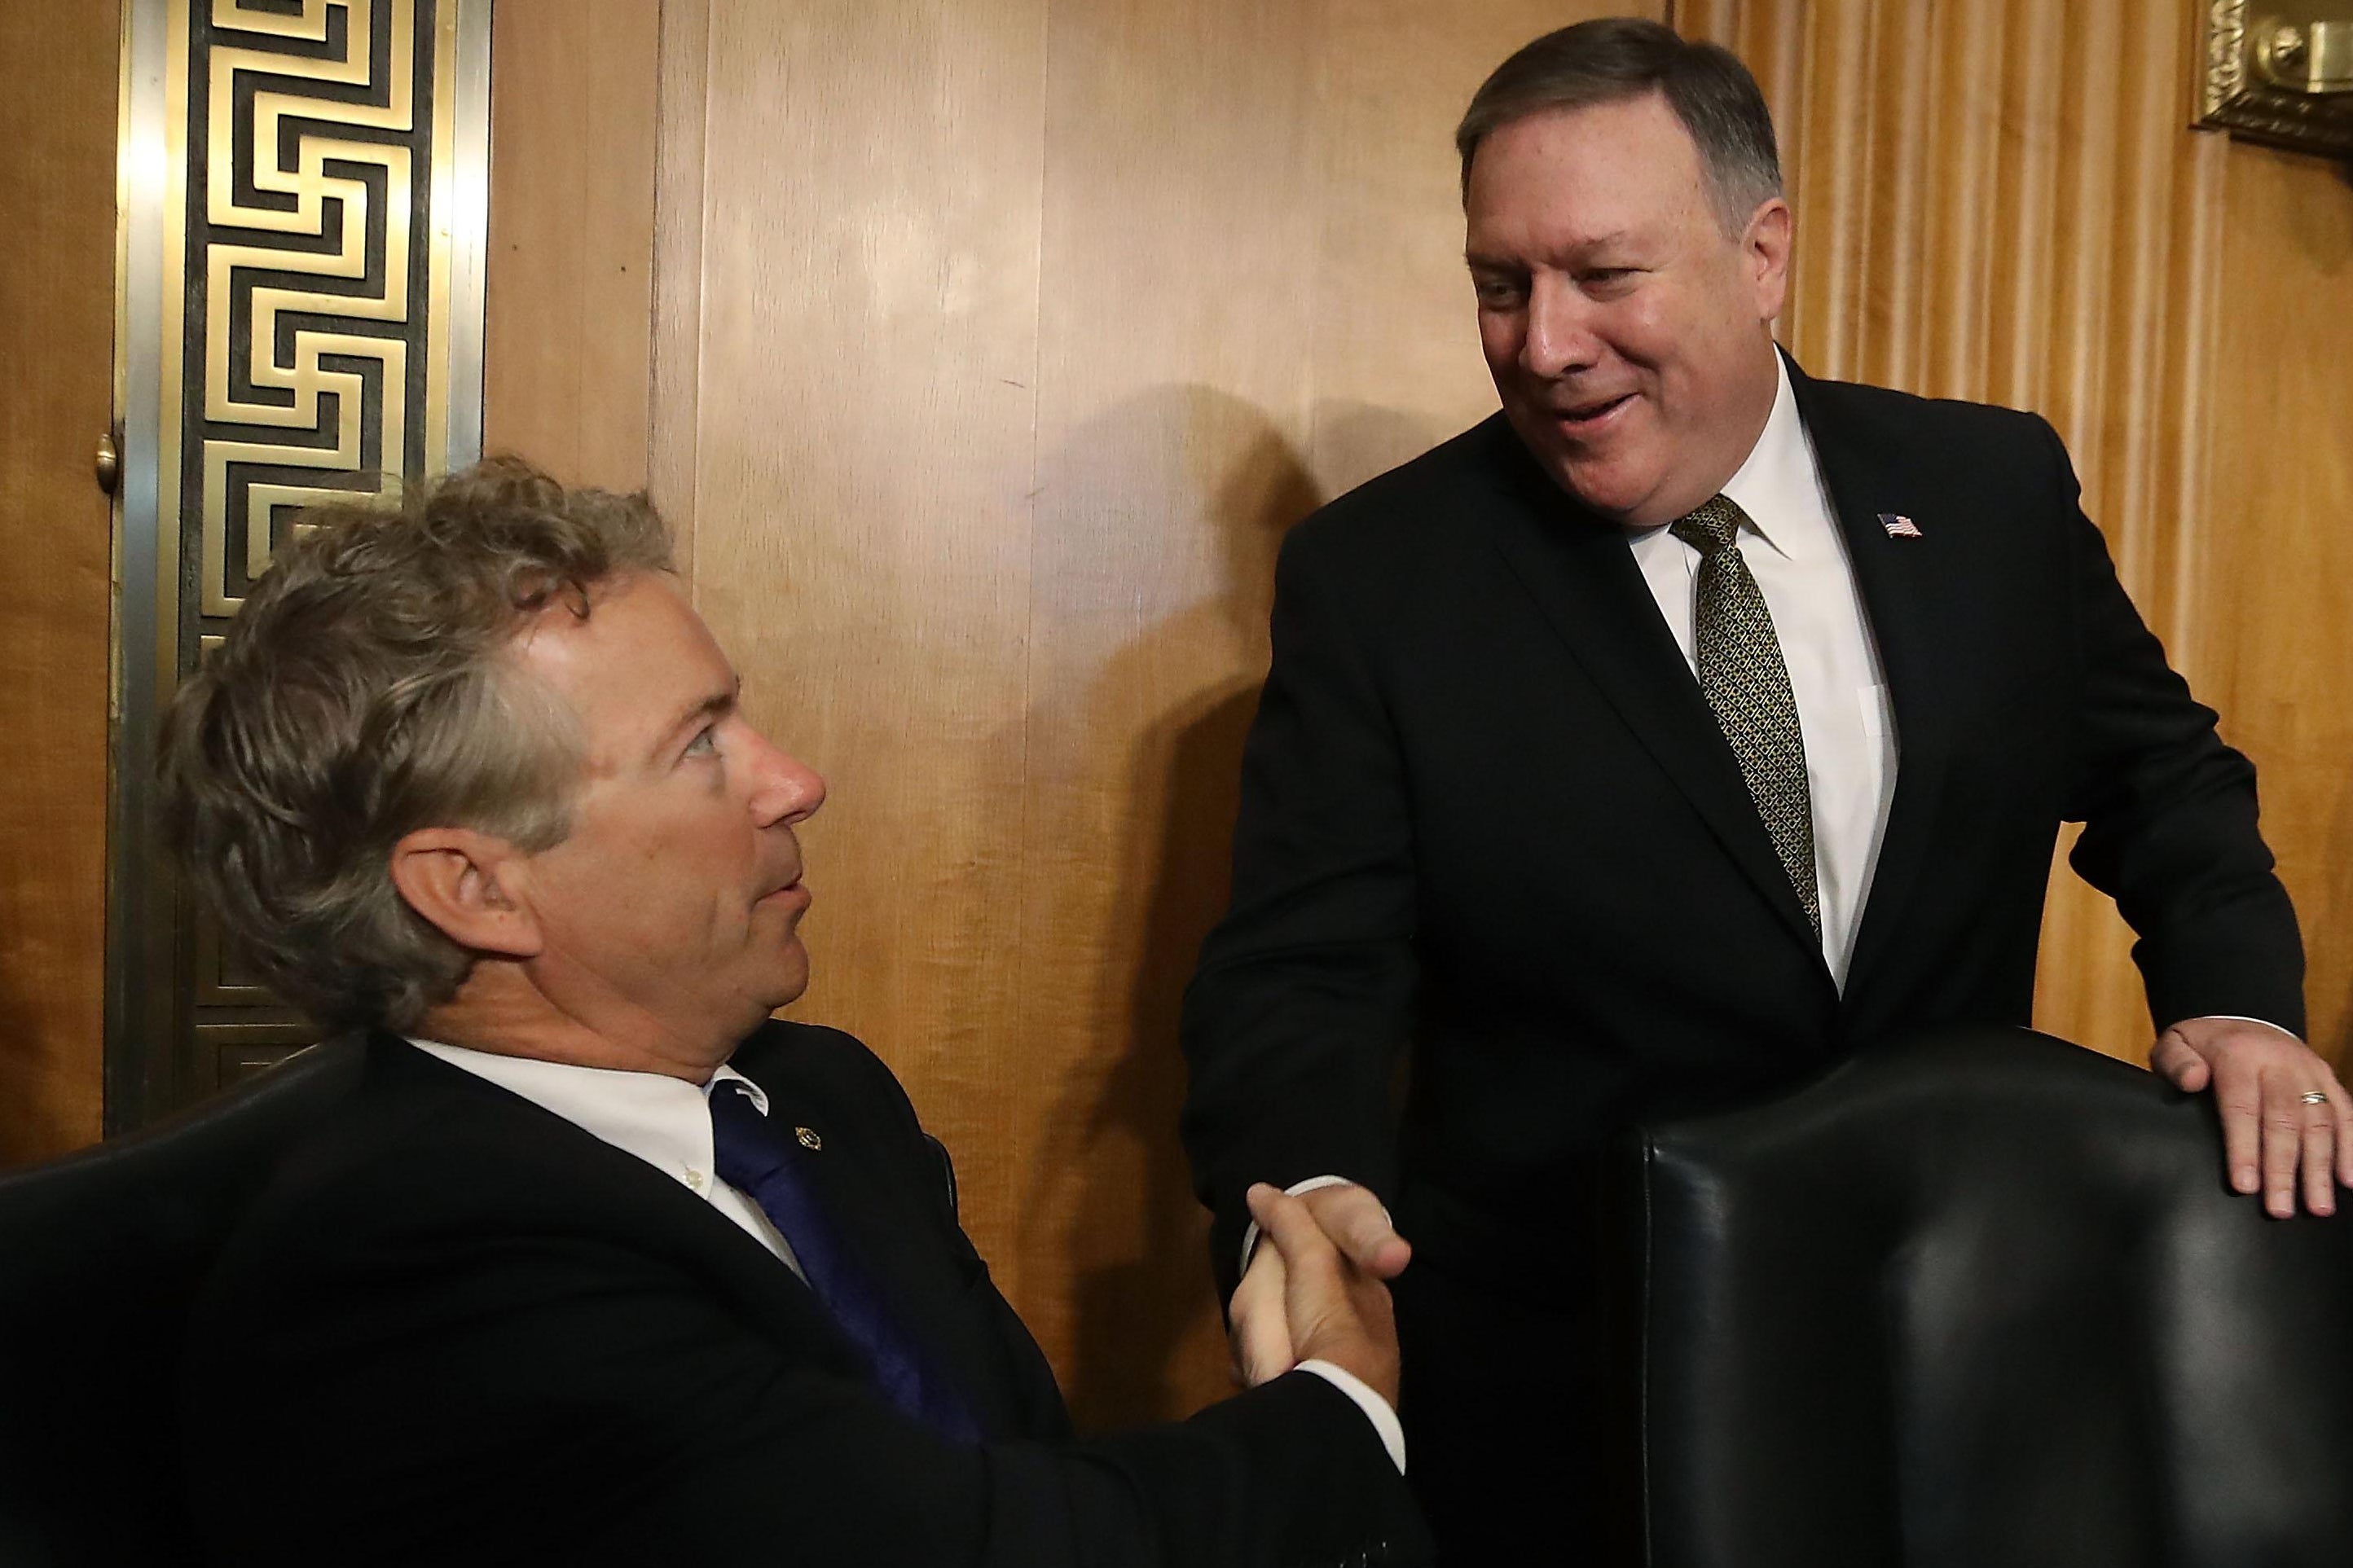 Rand Paul shakes Mike Pompeo’s hand.